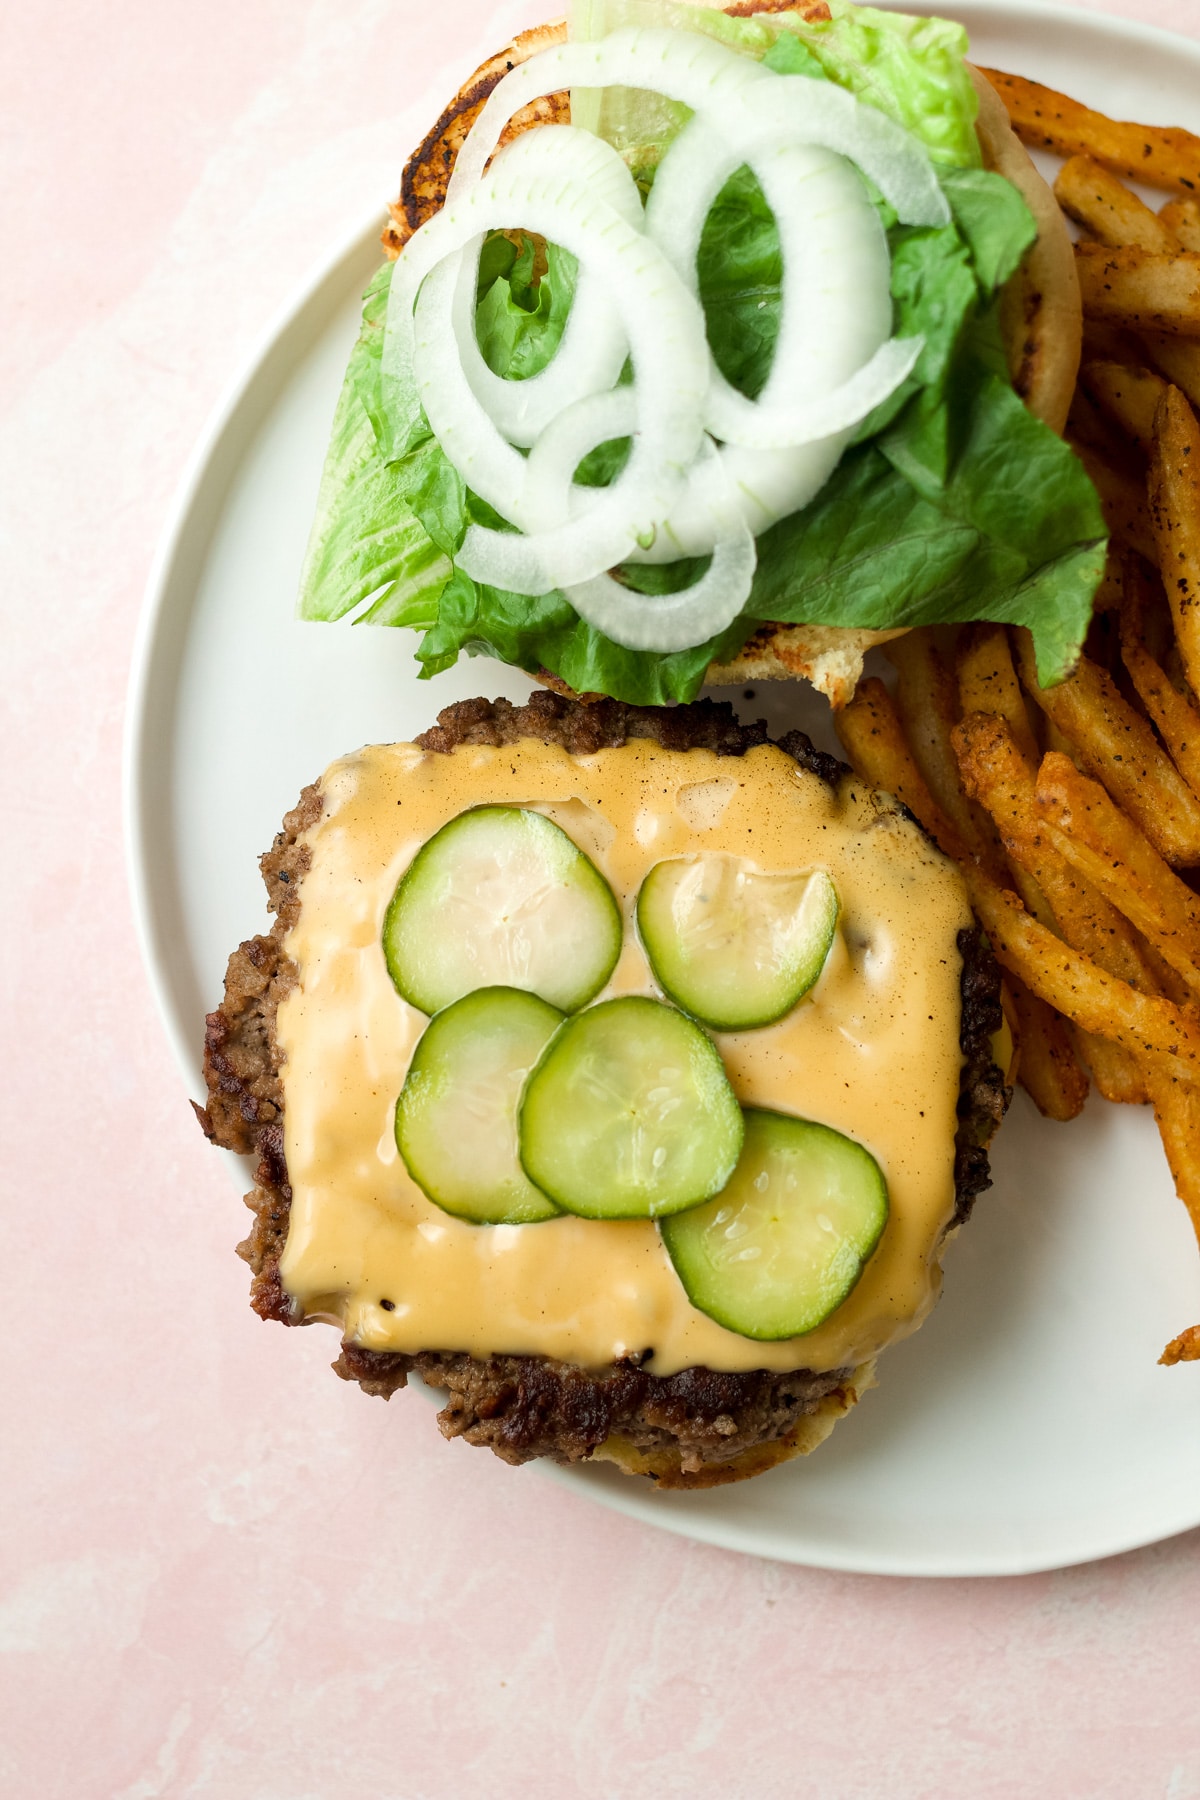 Refrigerator dill pickles on top of burger patty on plate.